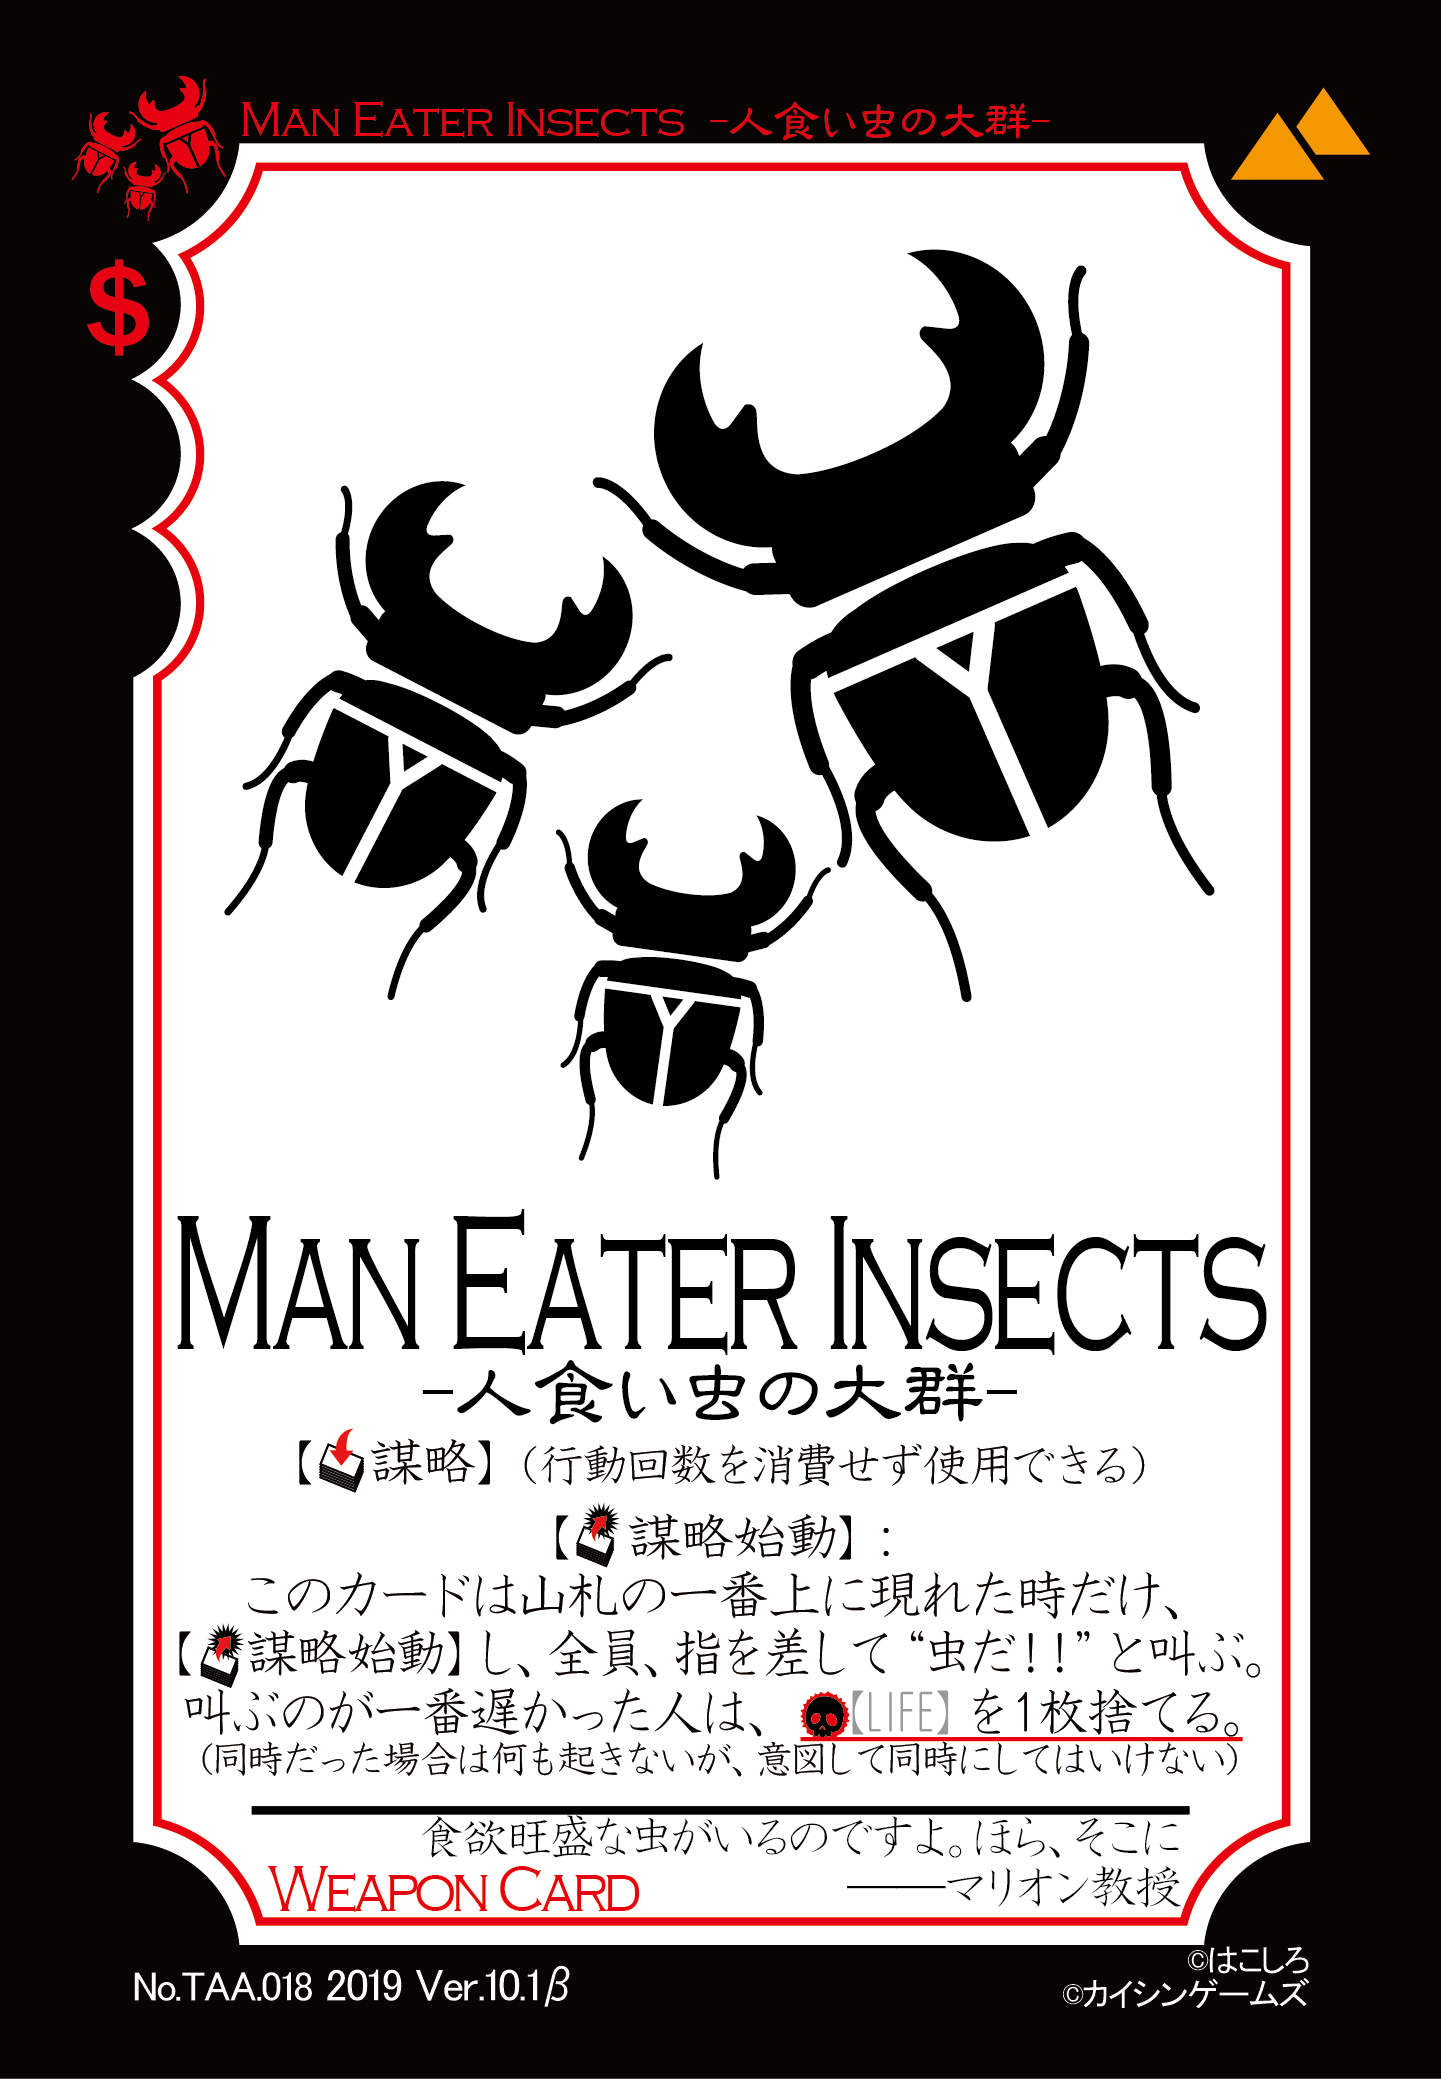 MAN EATER INSECTS